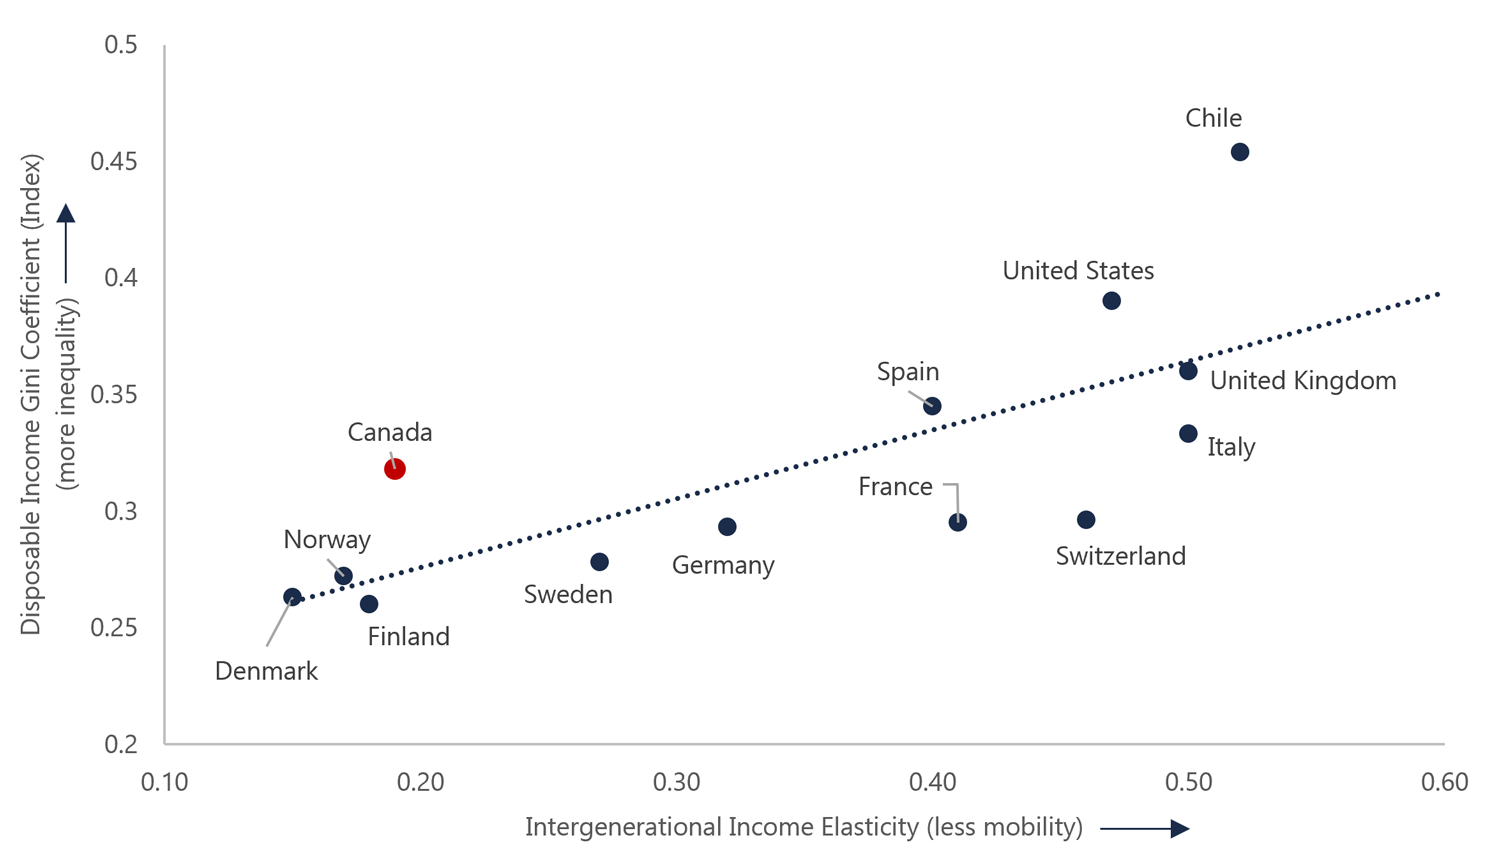 3.9 Higher income inequality associated with lower intergenerational income mobility